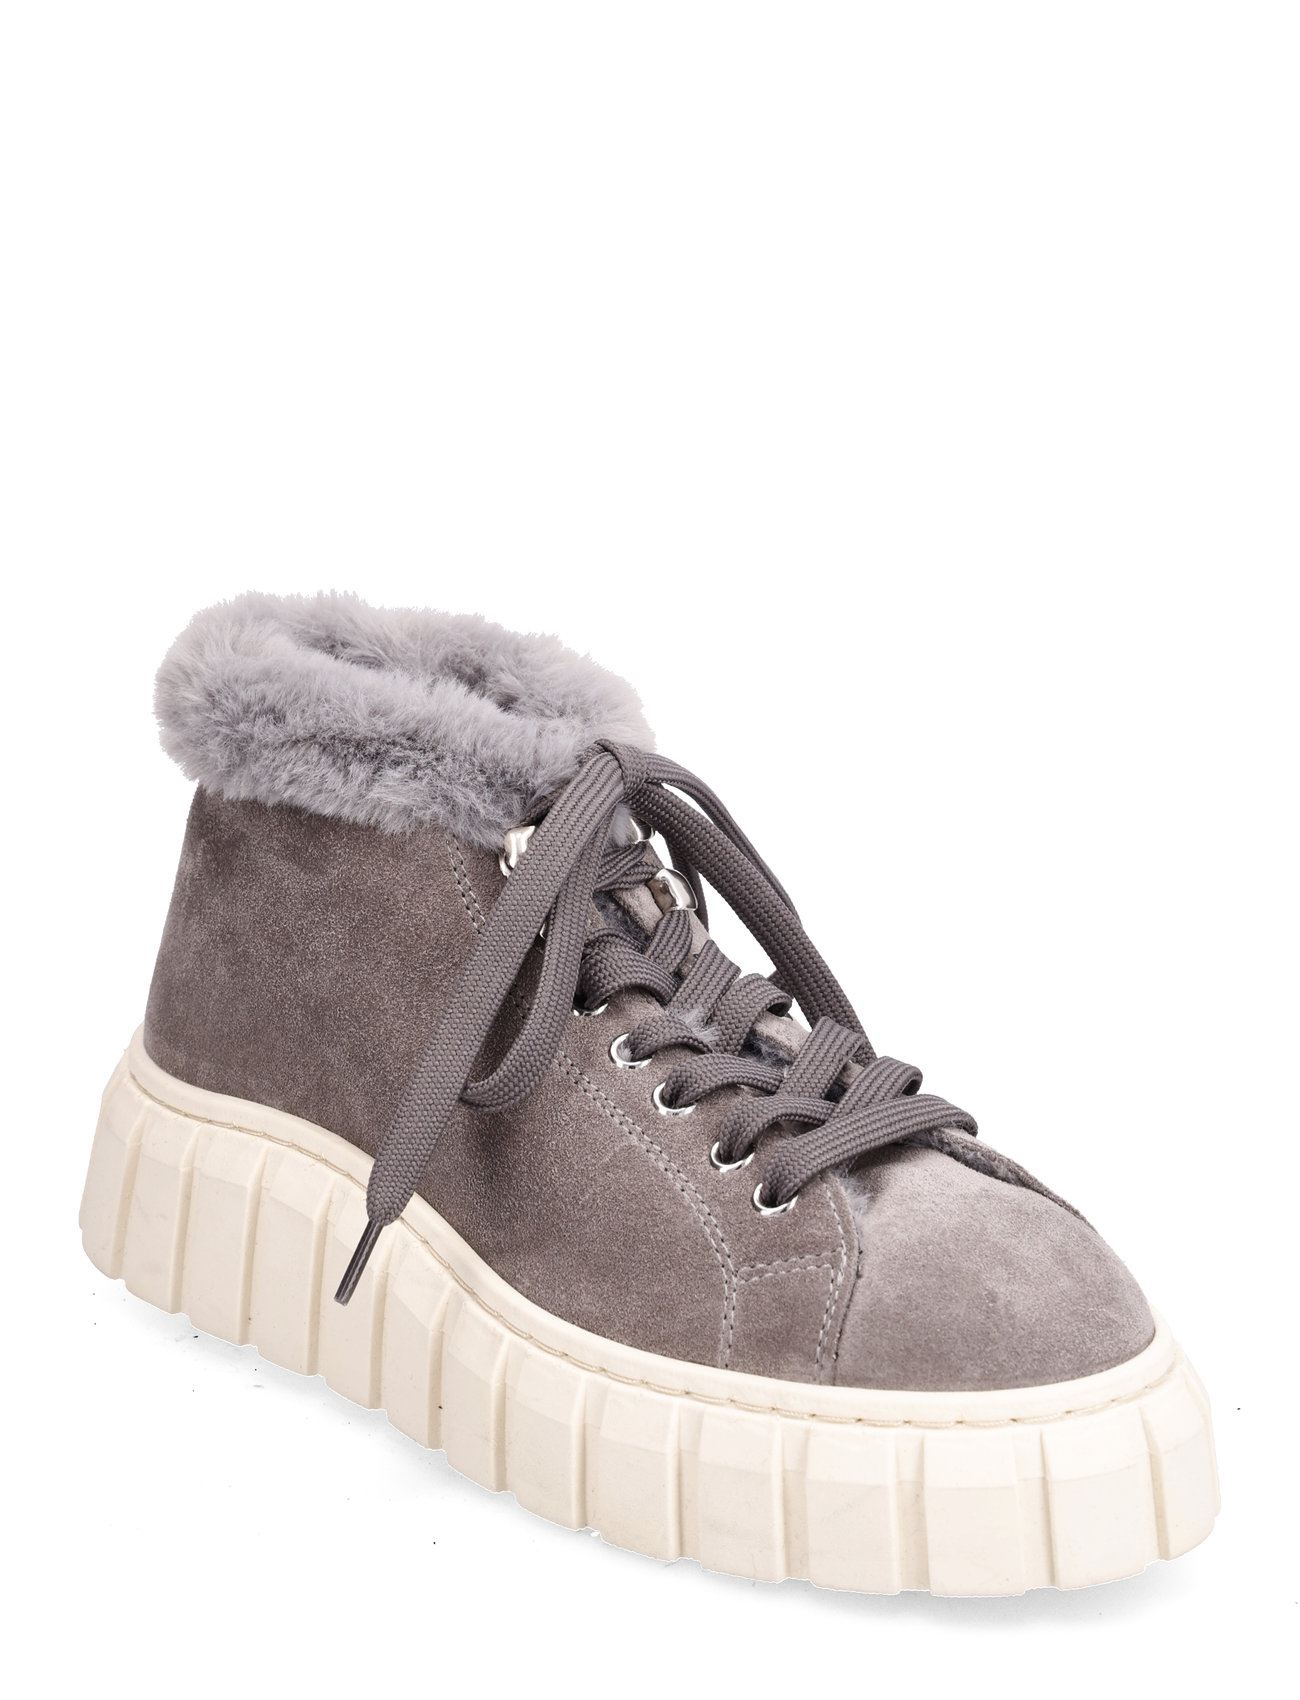 Balo Sneaker Boot - Grey Suede Shoes Sneakers Chunky Sneakers Grey Garment Project